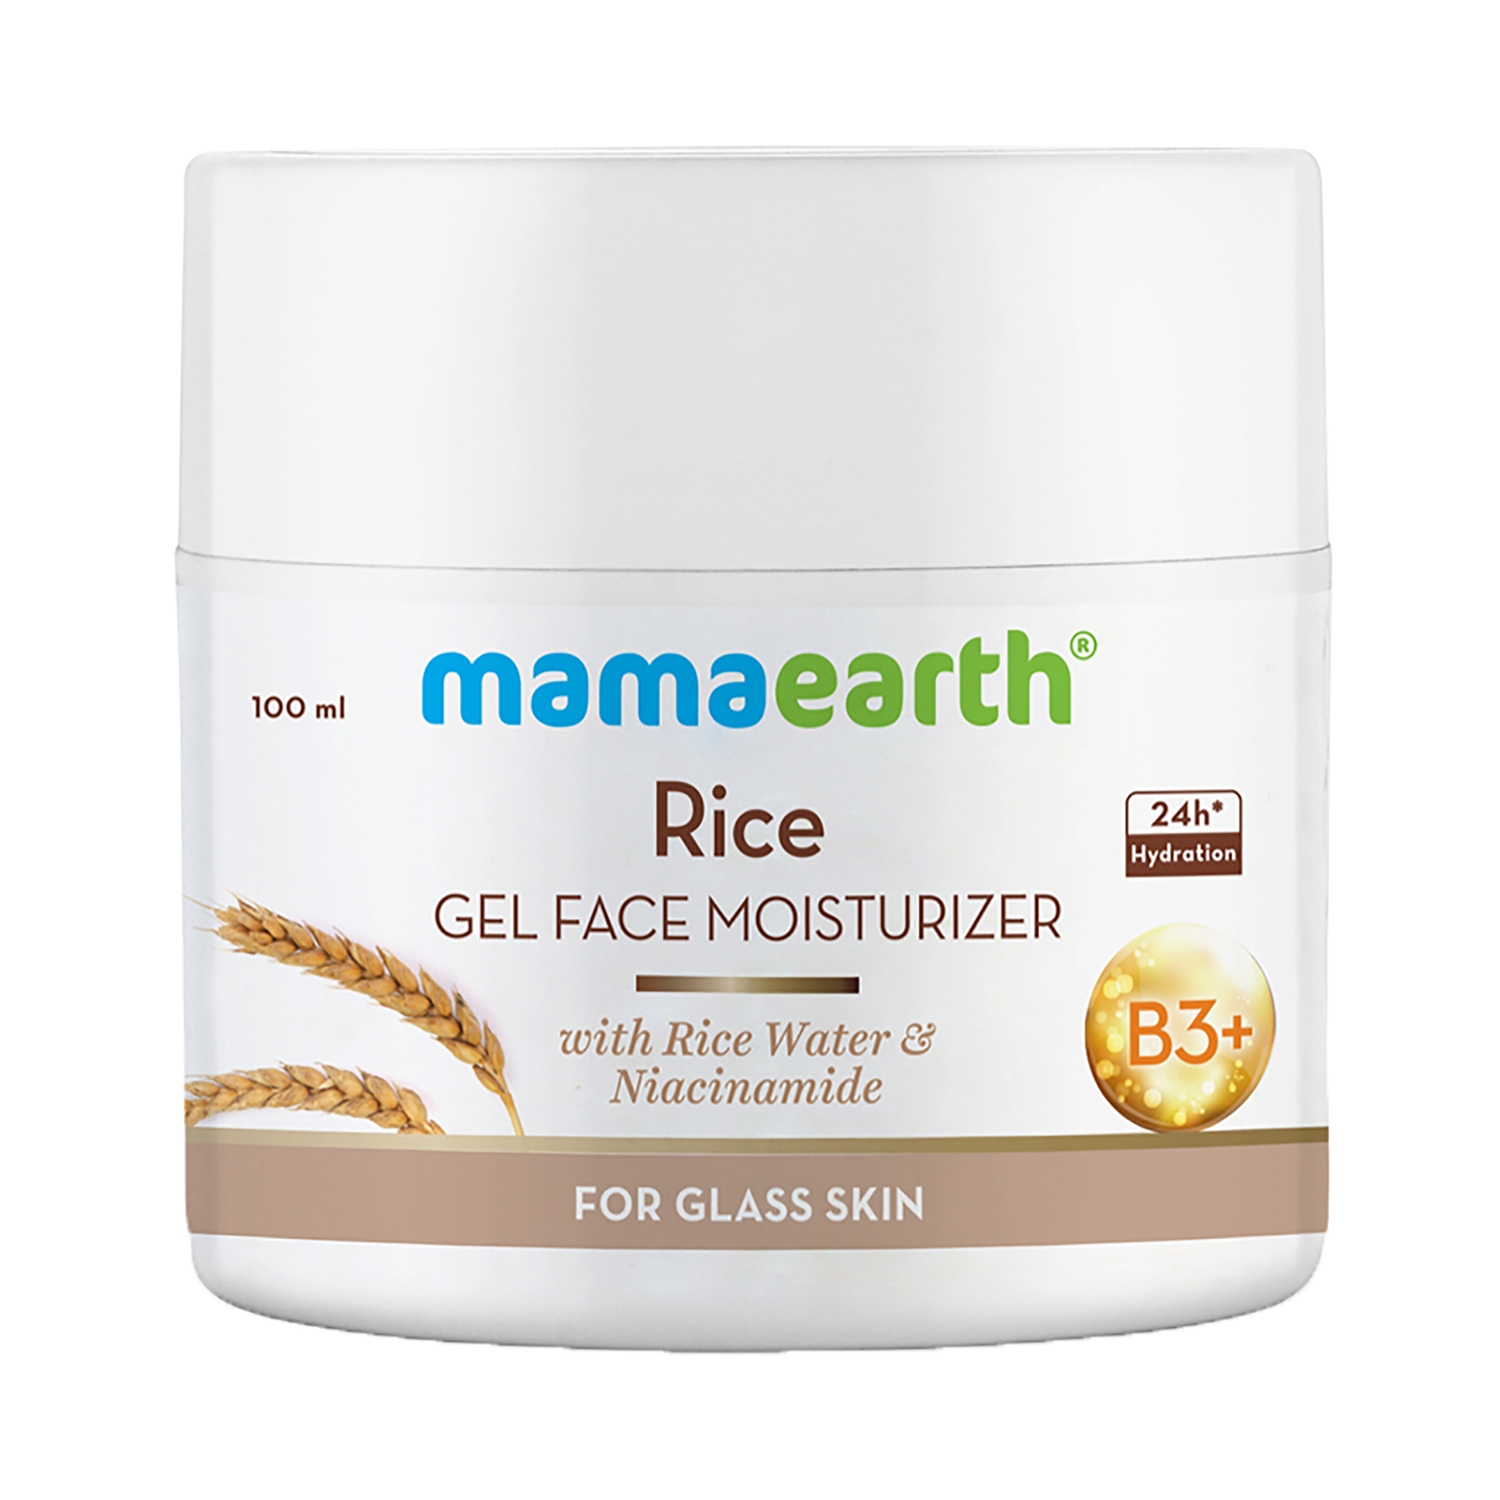 Mamaearth | Mamaearth Rice Gel Face Moisturizer With Rice Water & Niacinamide For Glass Skin (100ml)